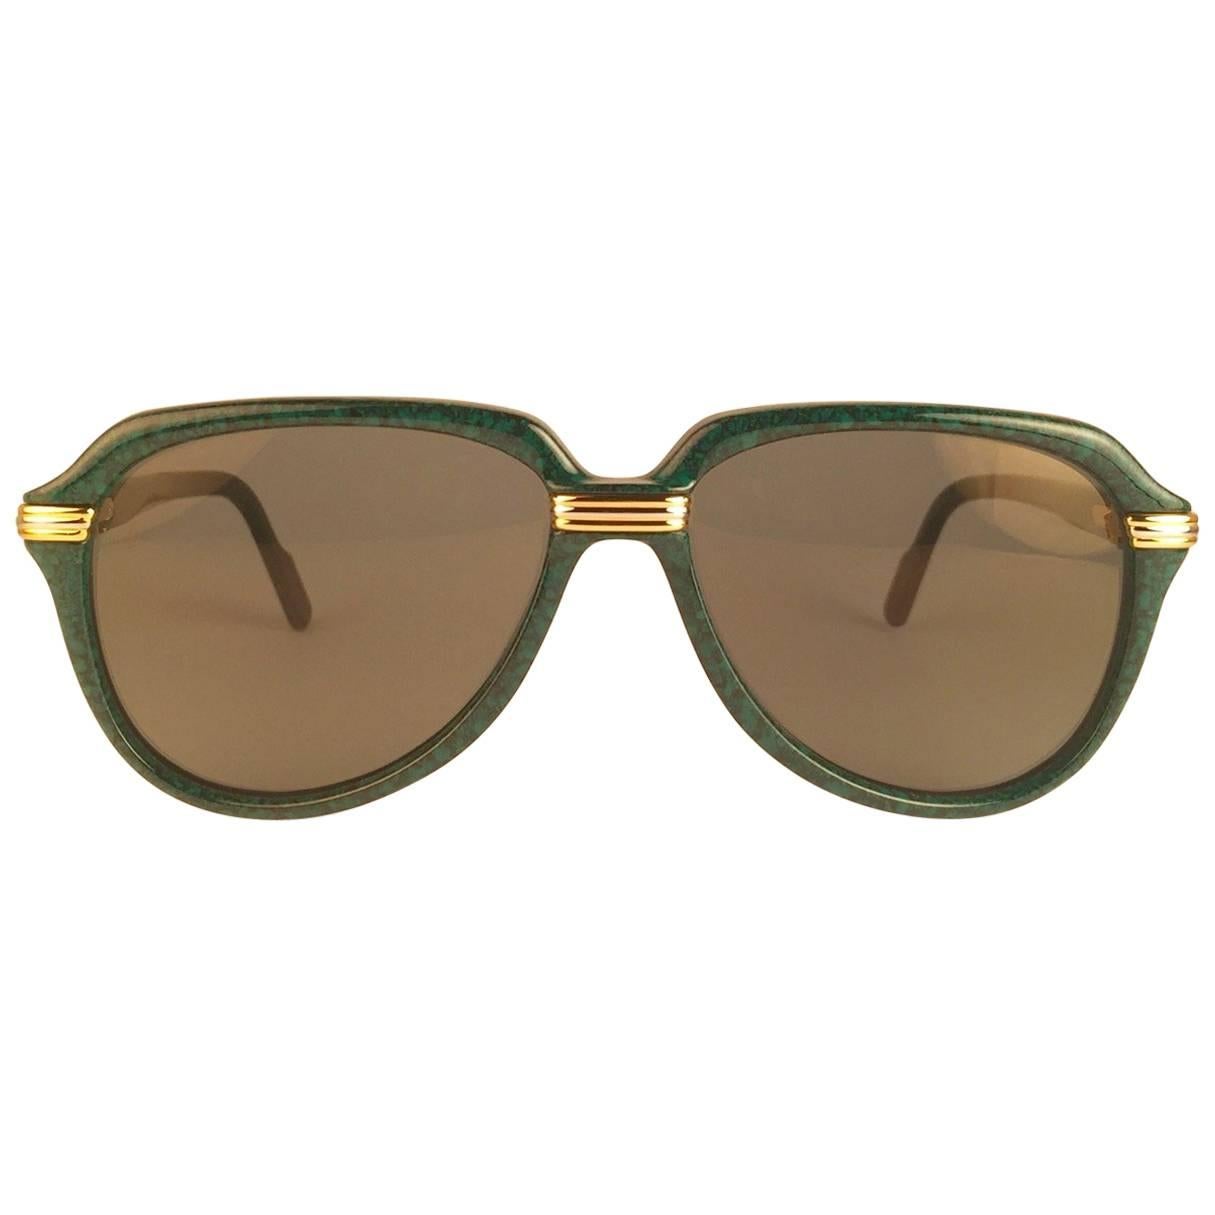 New Collectors Item. 
Unique and Rare Prototype Cartier Aviator Vitesse sunglasses, the Marbled Green Edition with yellow and white gold accents.
Frame is with the sides in gold and white hard plated gold. All hallmarks. Cartier gold signs on the